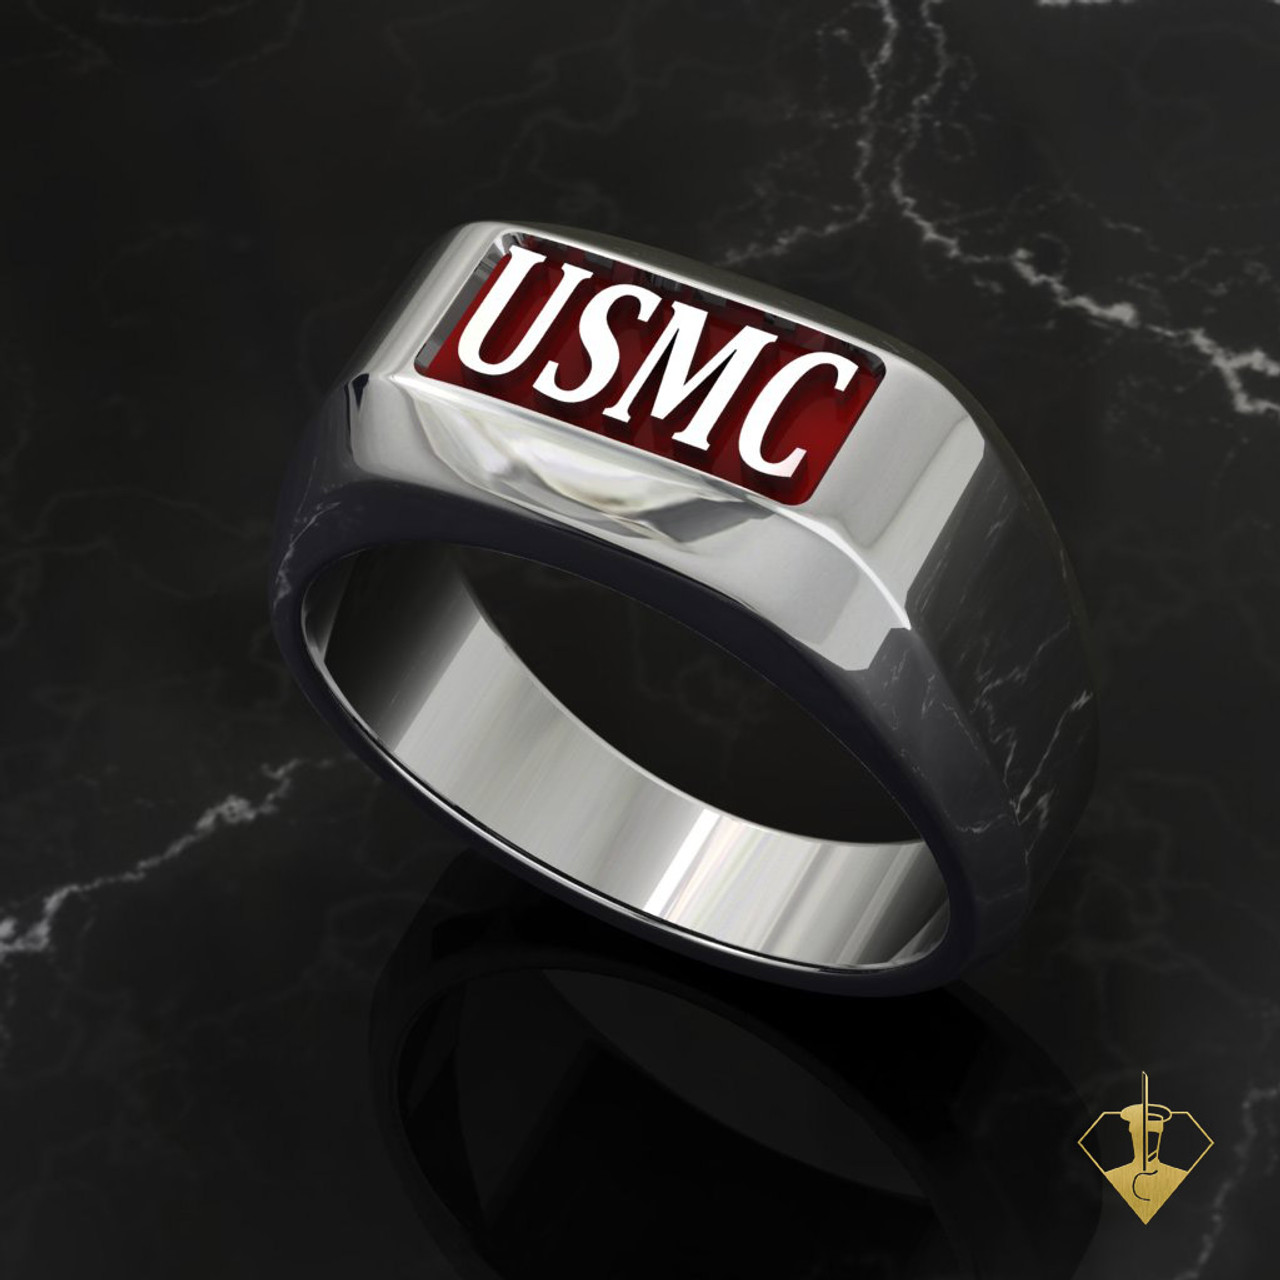 Sterling Silver USMC Rugged Ring with Inset Raised Letters with Red Inlay
